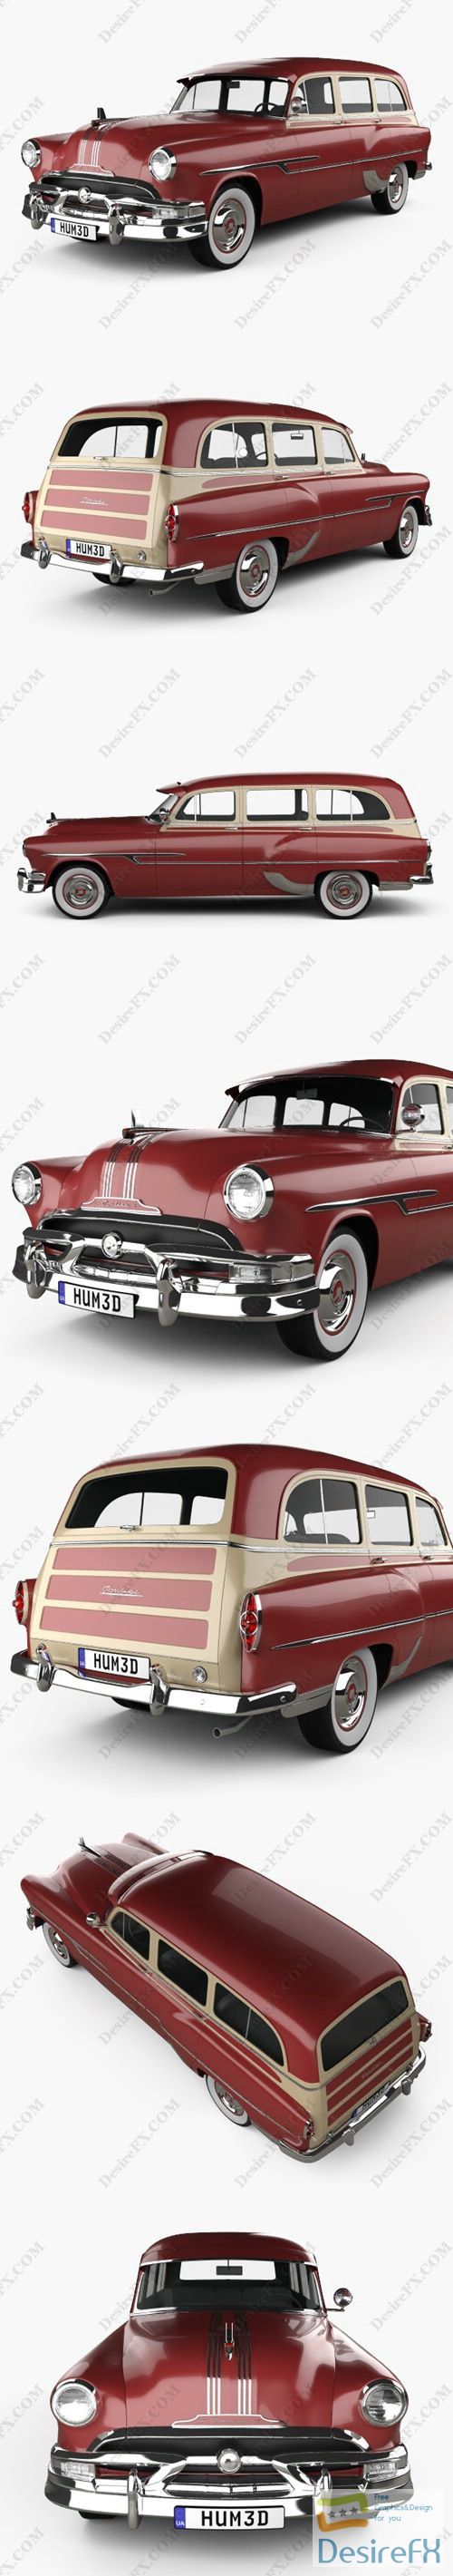 Pontiac Chieftain Deluxe Station Wagon 1953 3D Model